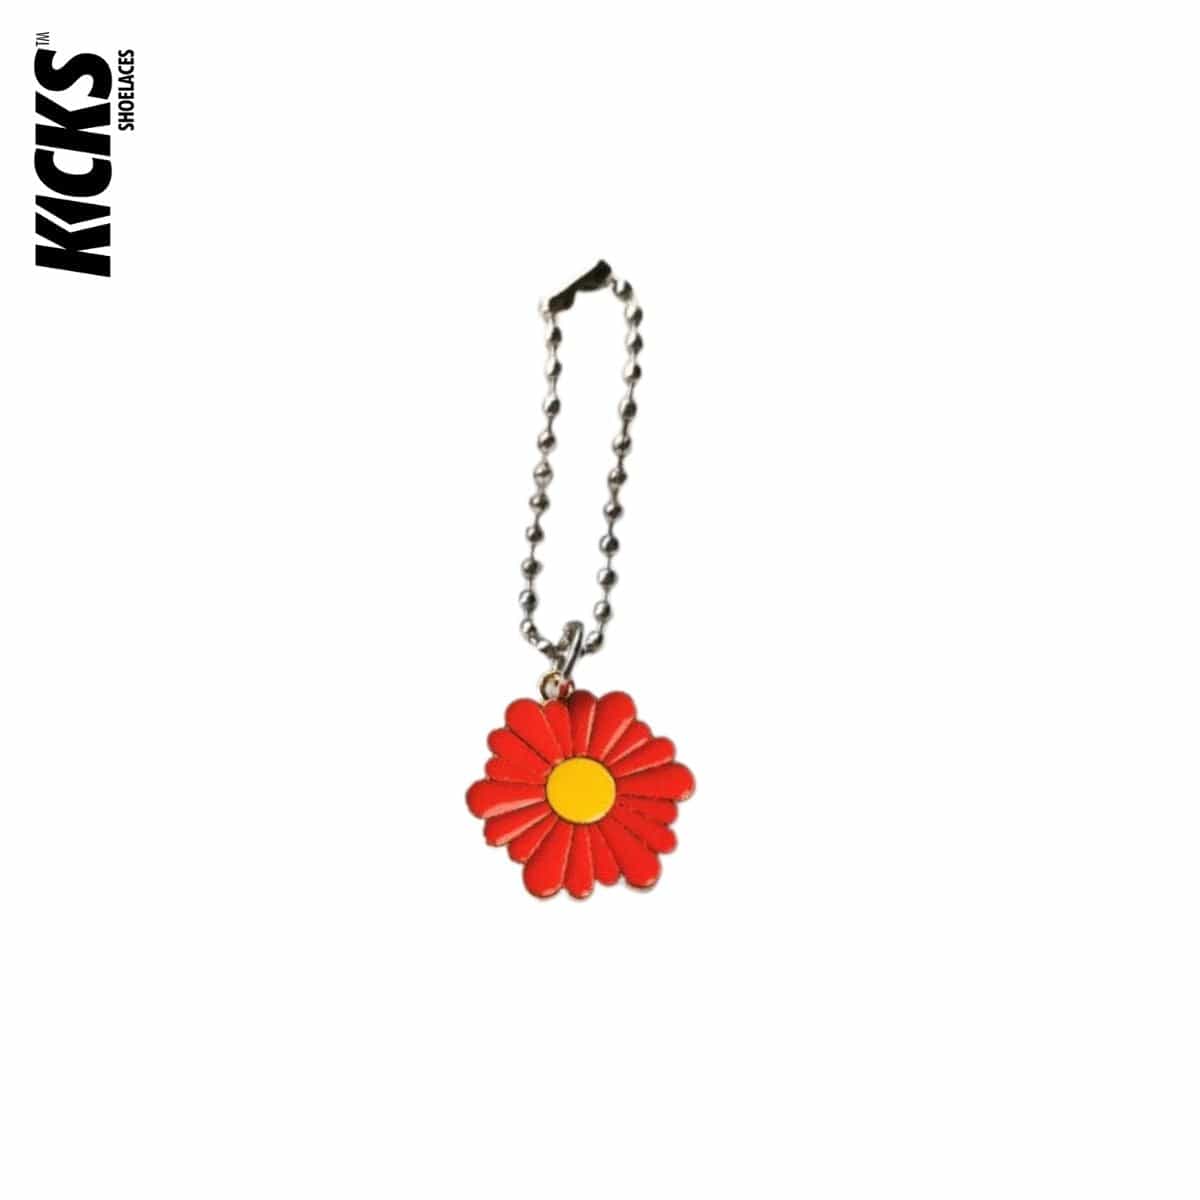    red-daisy-flower-charm